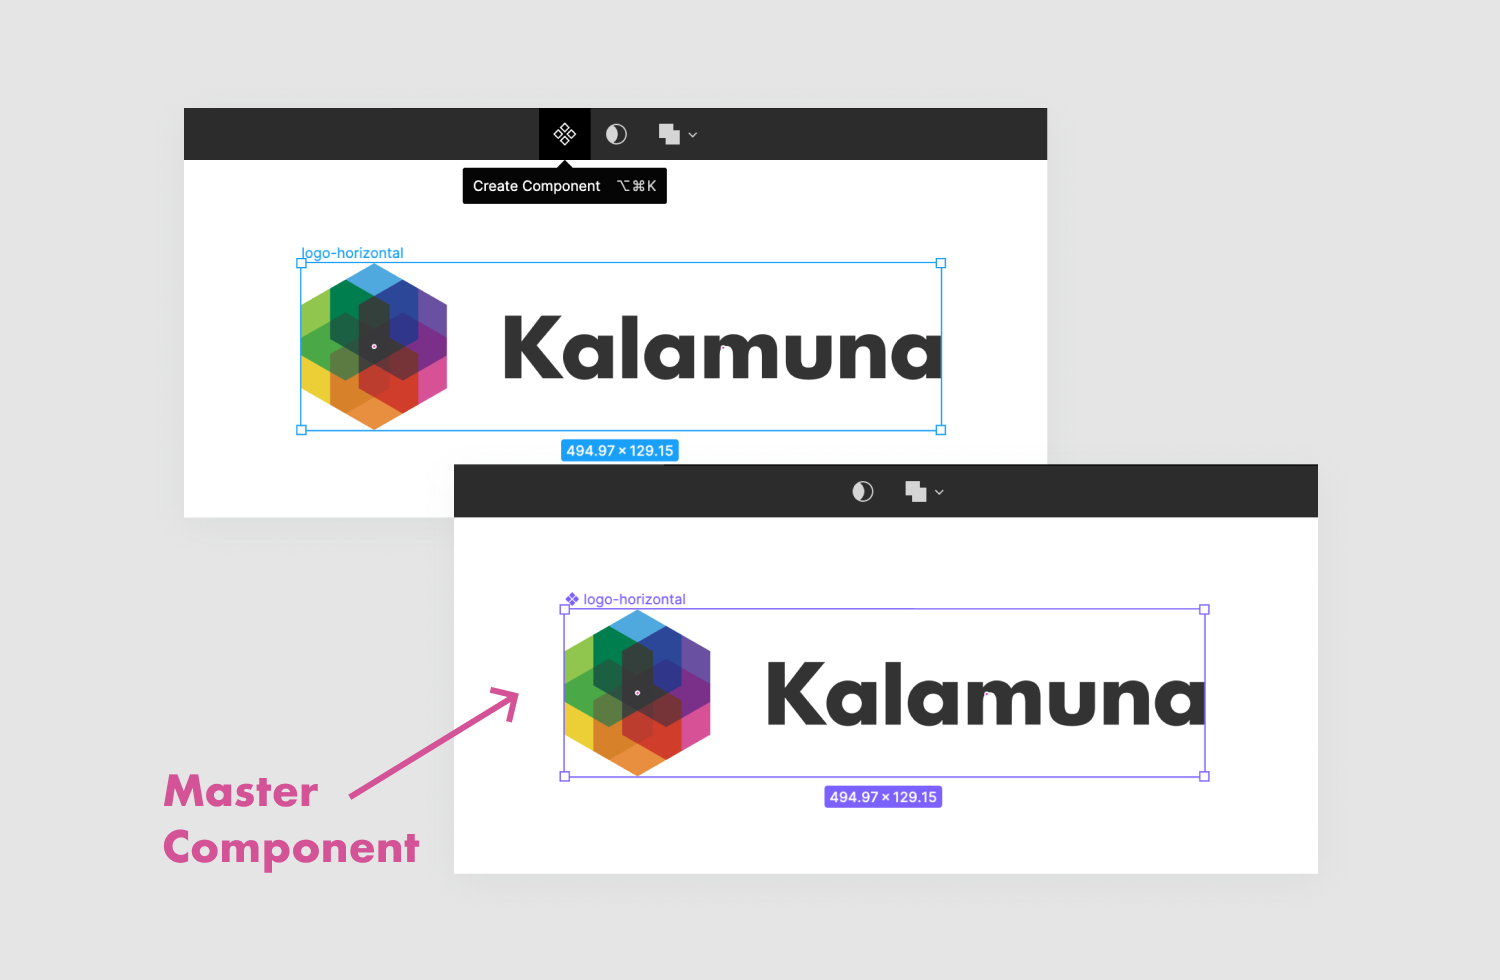 Screenshots of creating a component in Figma using Kalamuna's logo as an example.